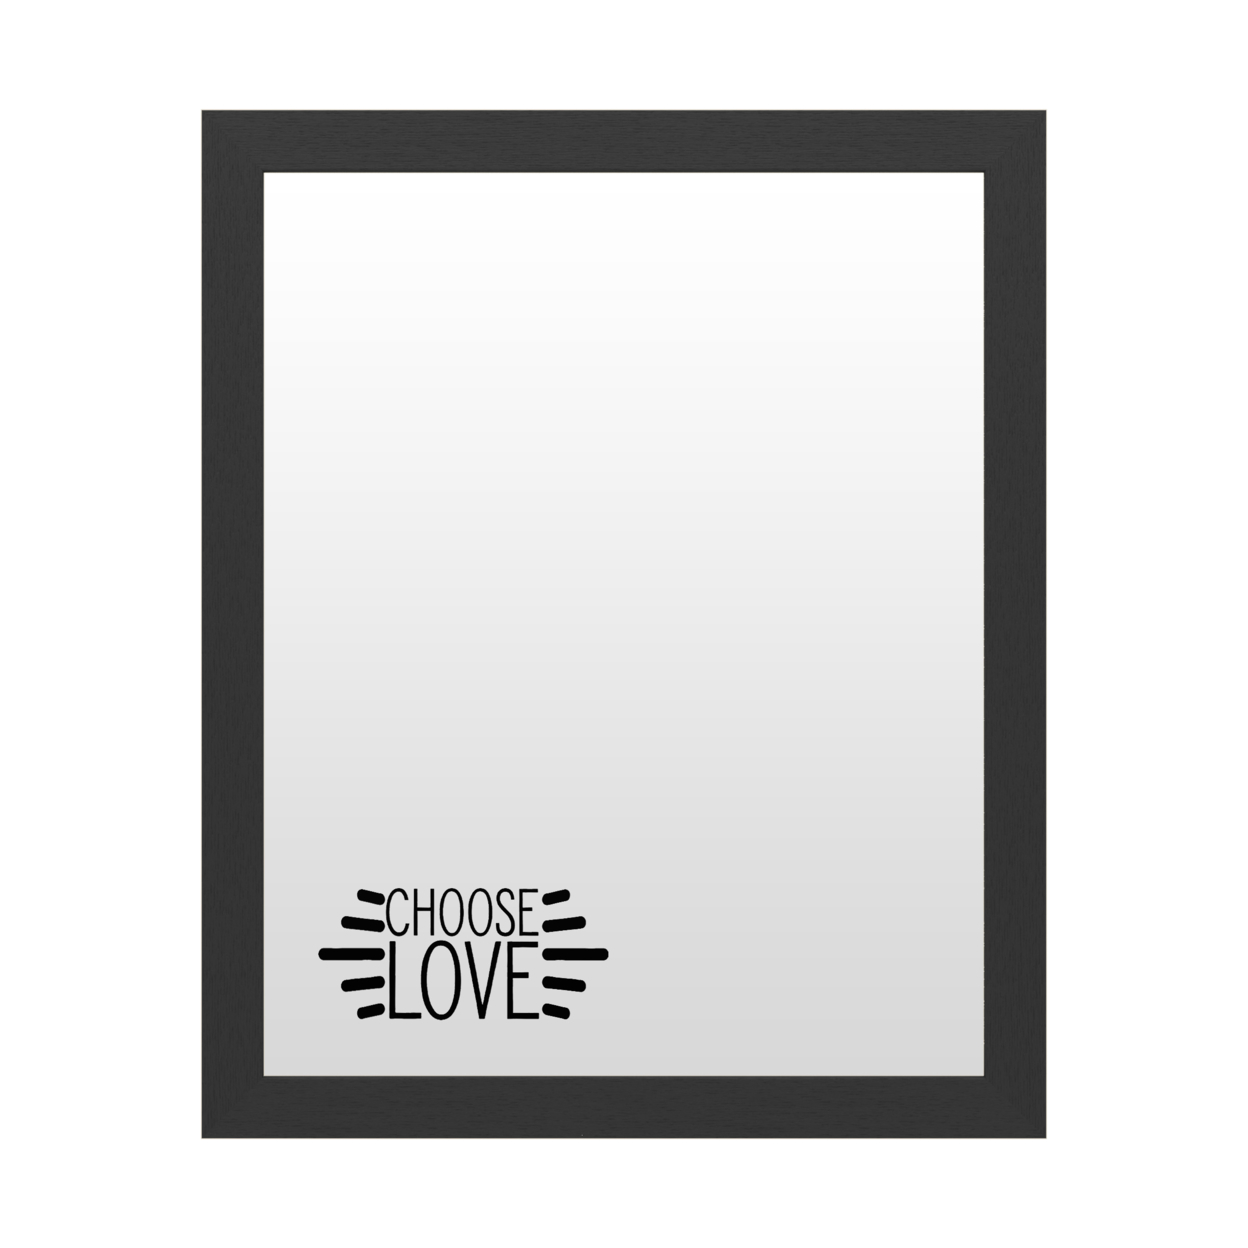 Dry Erase 16 X 20 Marker Board With Printed Artwork - Choose Love White Board - Ready To Hang